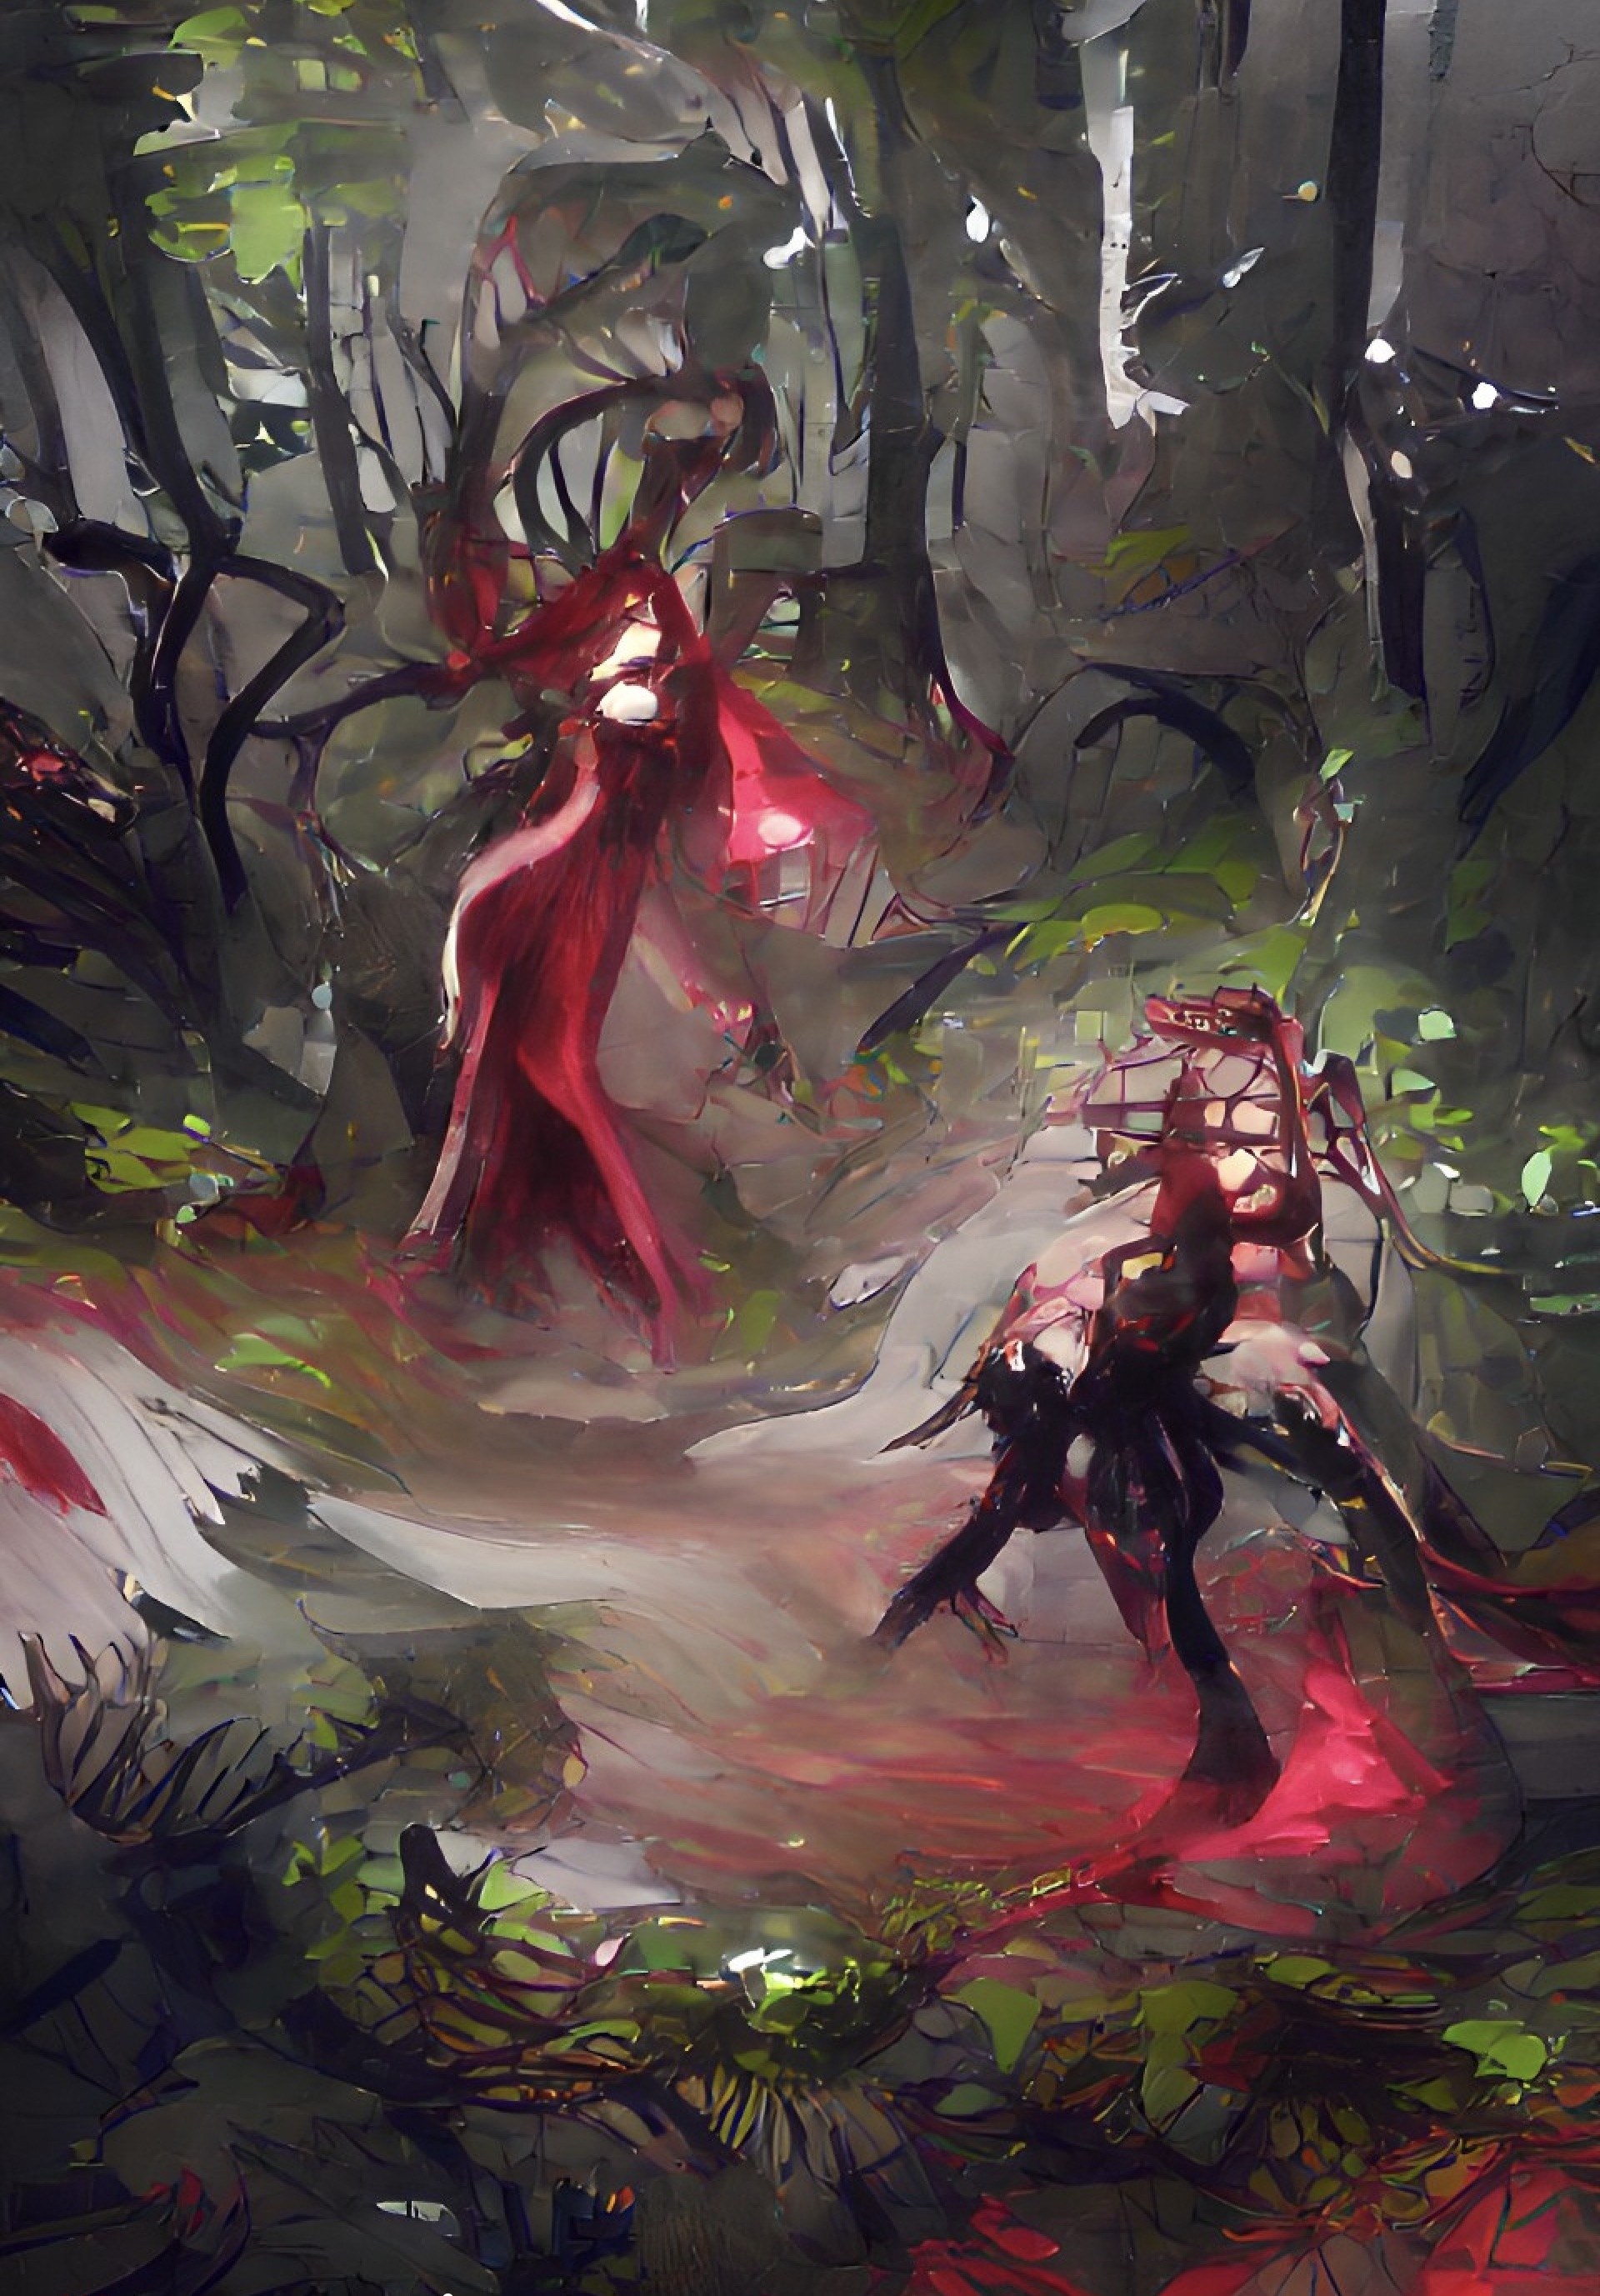 Digital painting of a Dryad & Norse Deity defeating demons in the woods. 